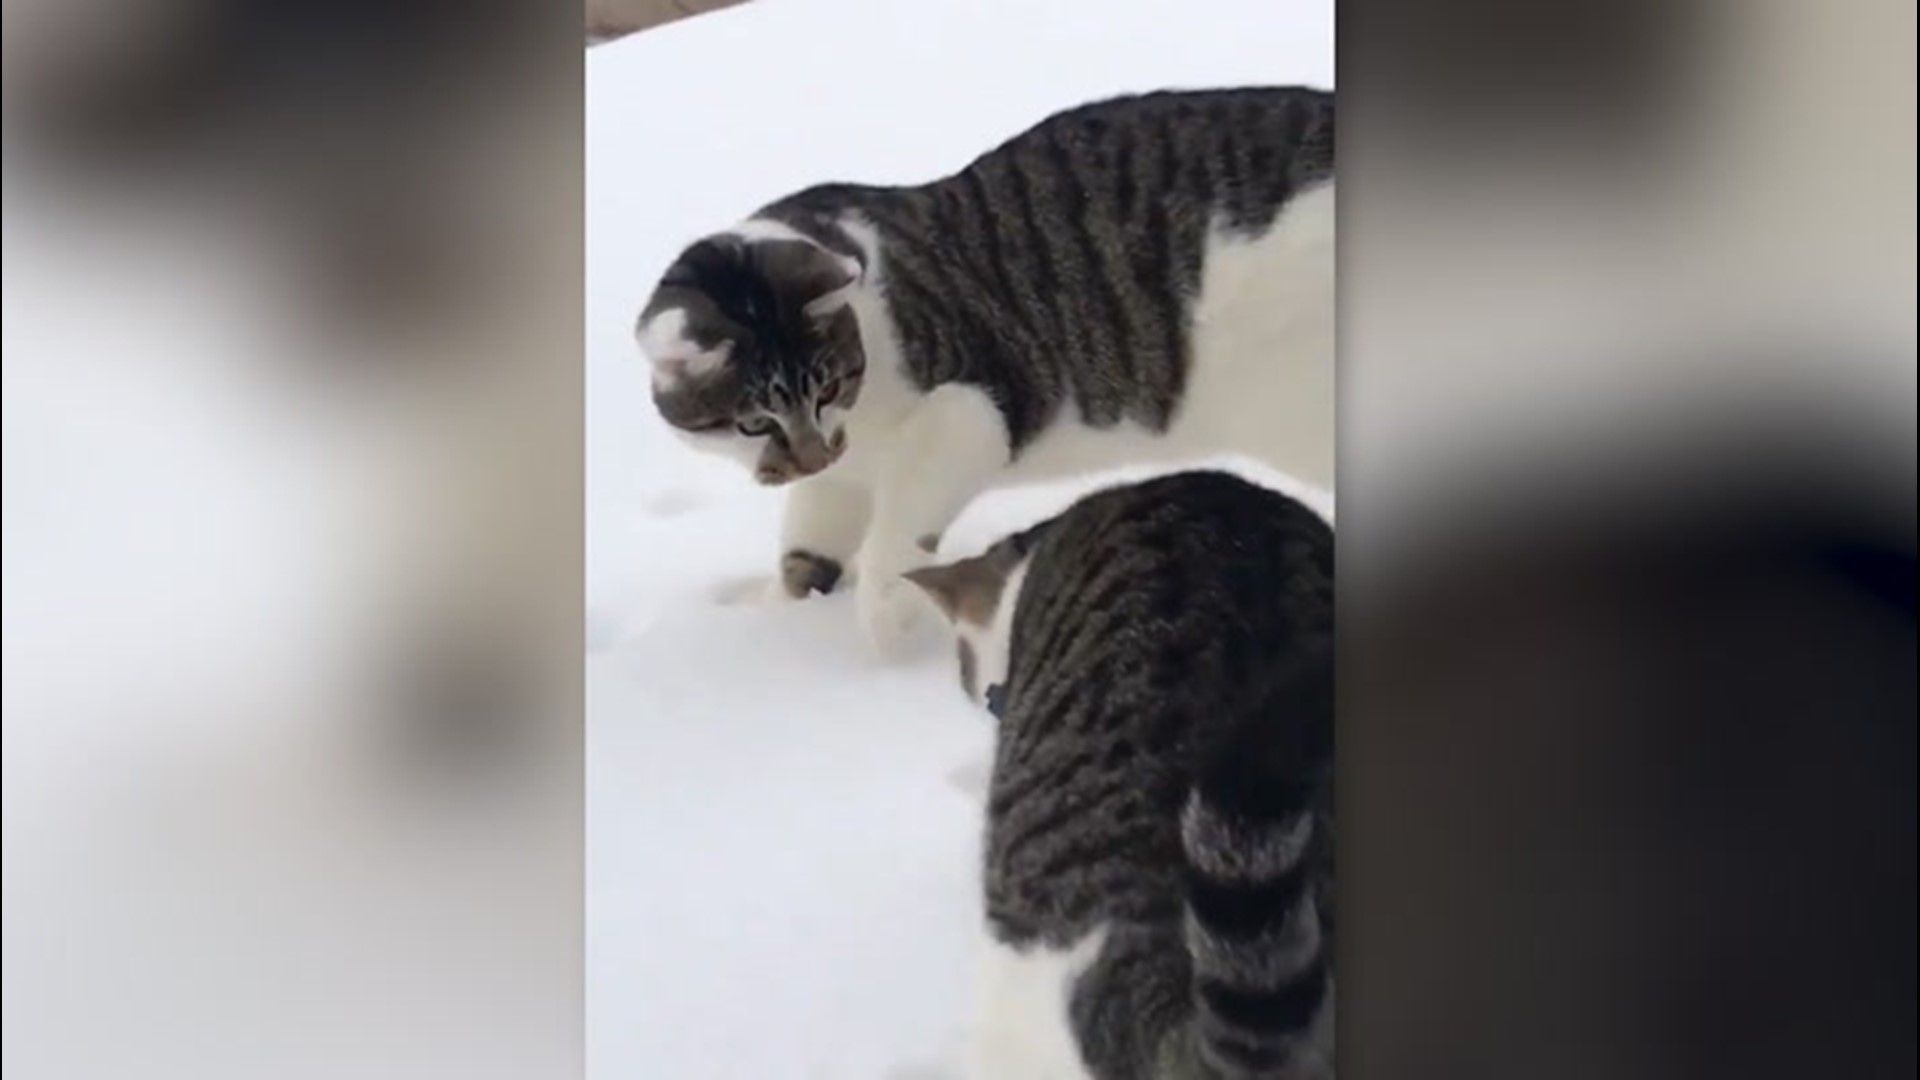 Two kittens in Colchester, Vermont, got to experience snow for their first time ever the day before Thanksgiving, taking full advantage by playing and pouncing among the powder.